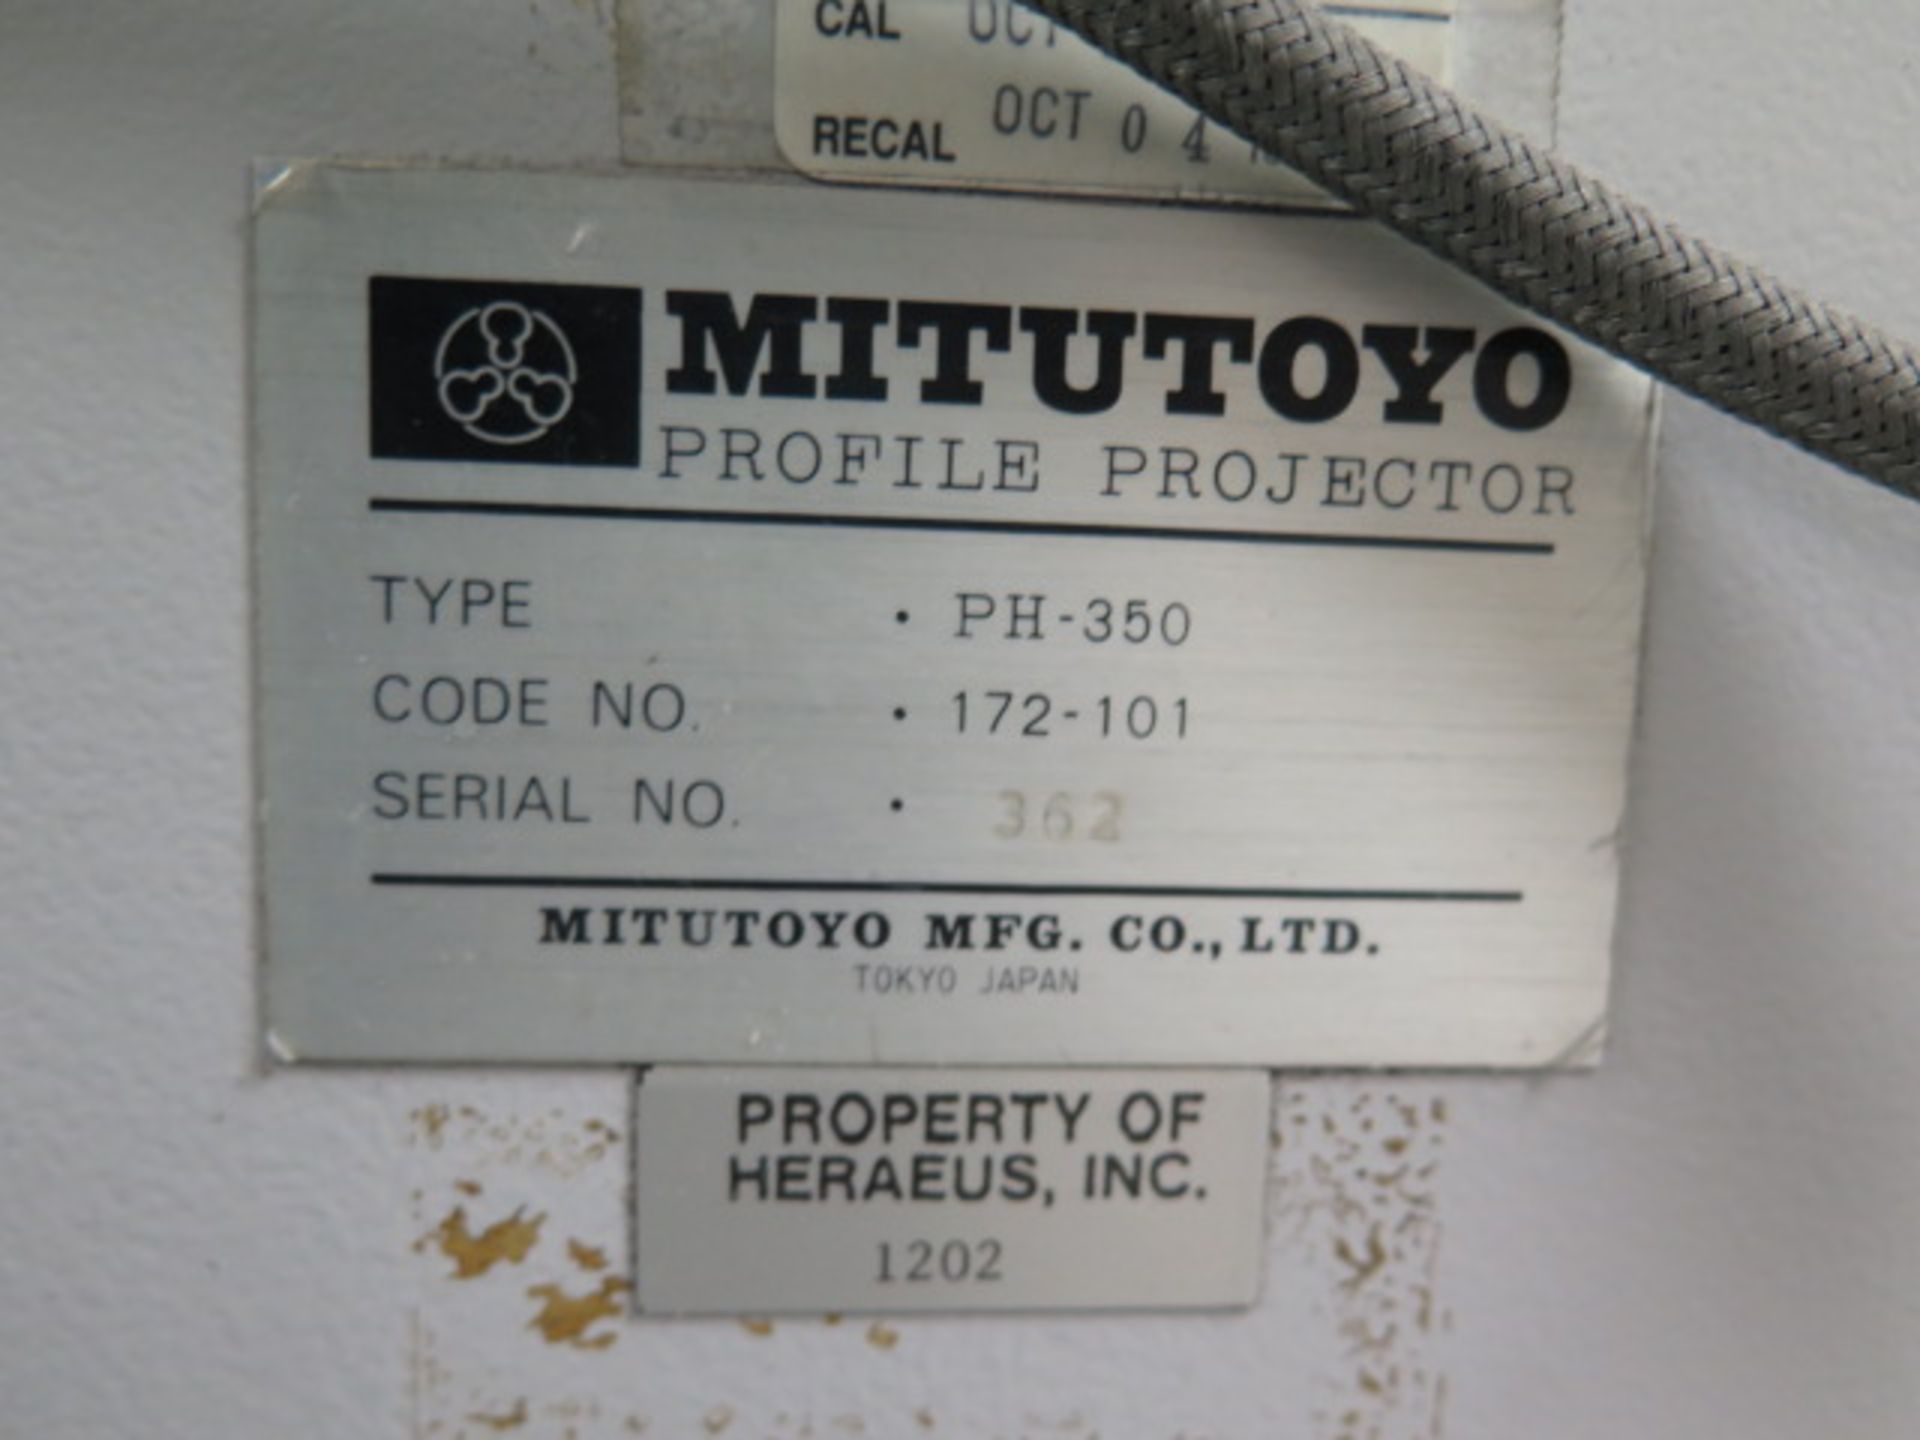 Mitutoyo PH-350 13" Optical Comparator s/n 362 w/ Mitutoyo DRO's, 20X and 50X Lenses, SOLD AS IS - Image 12 of 12